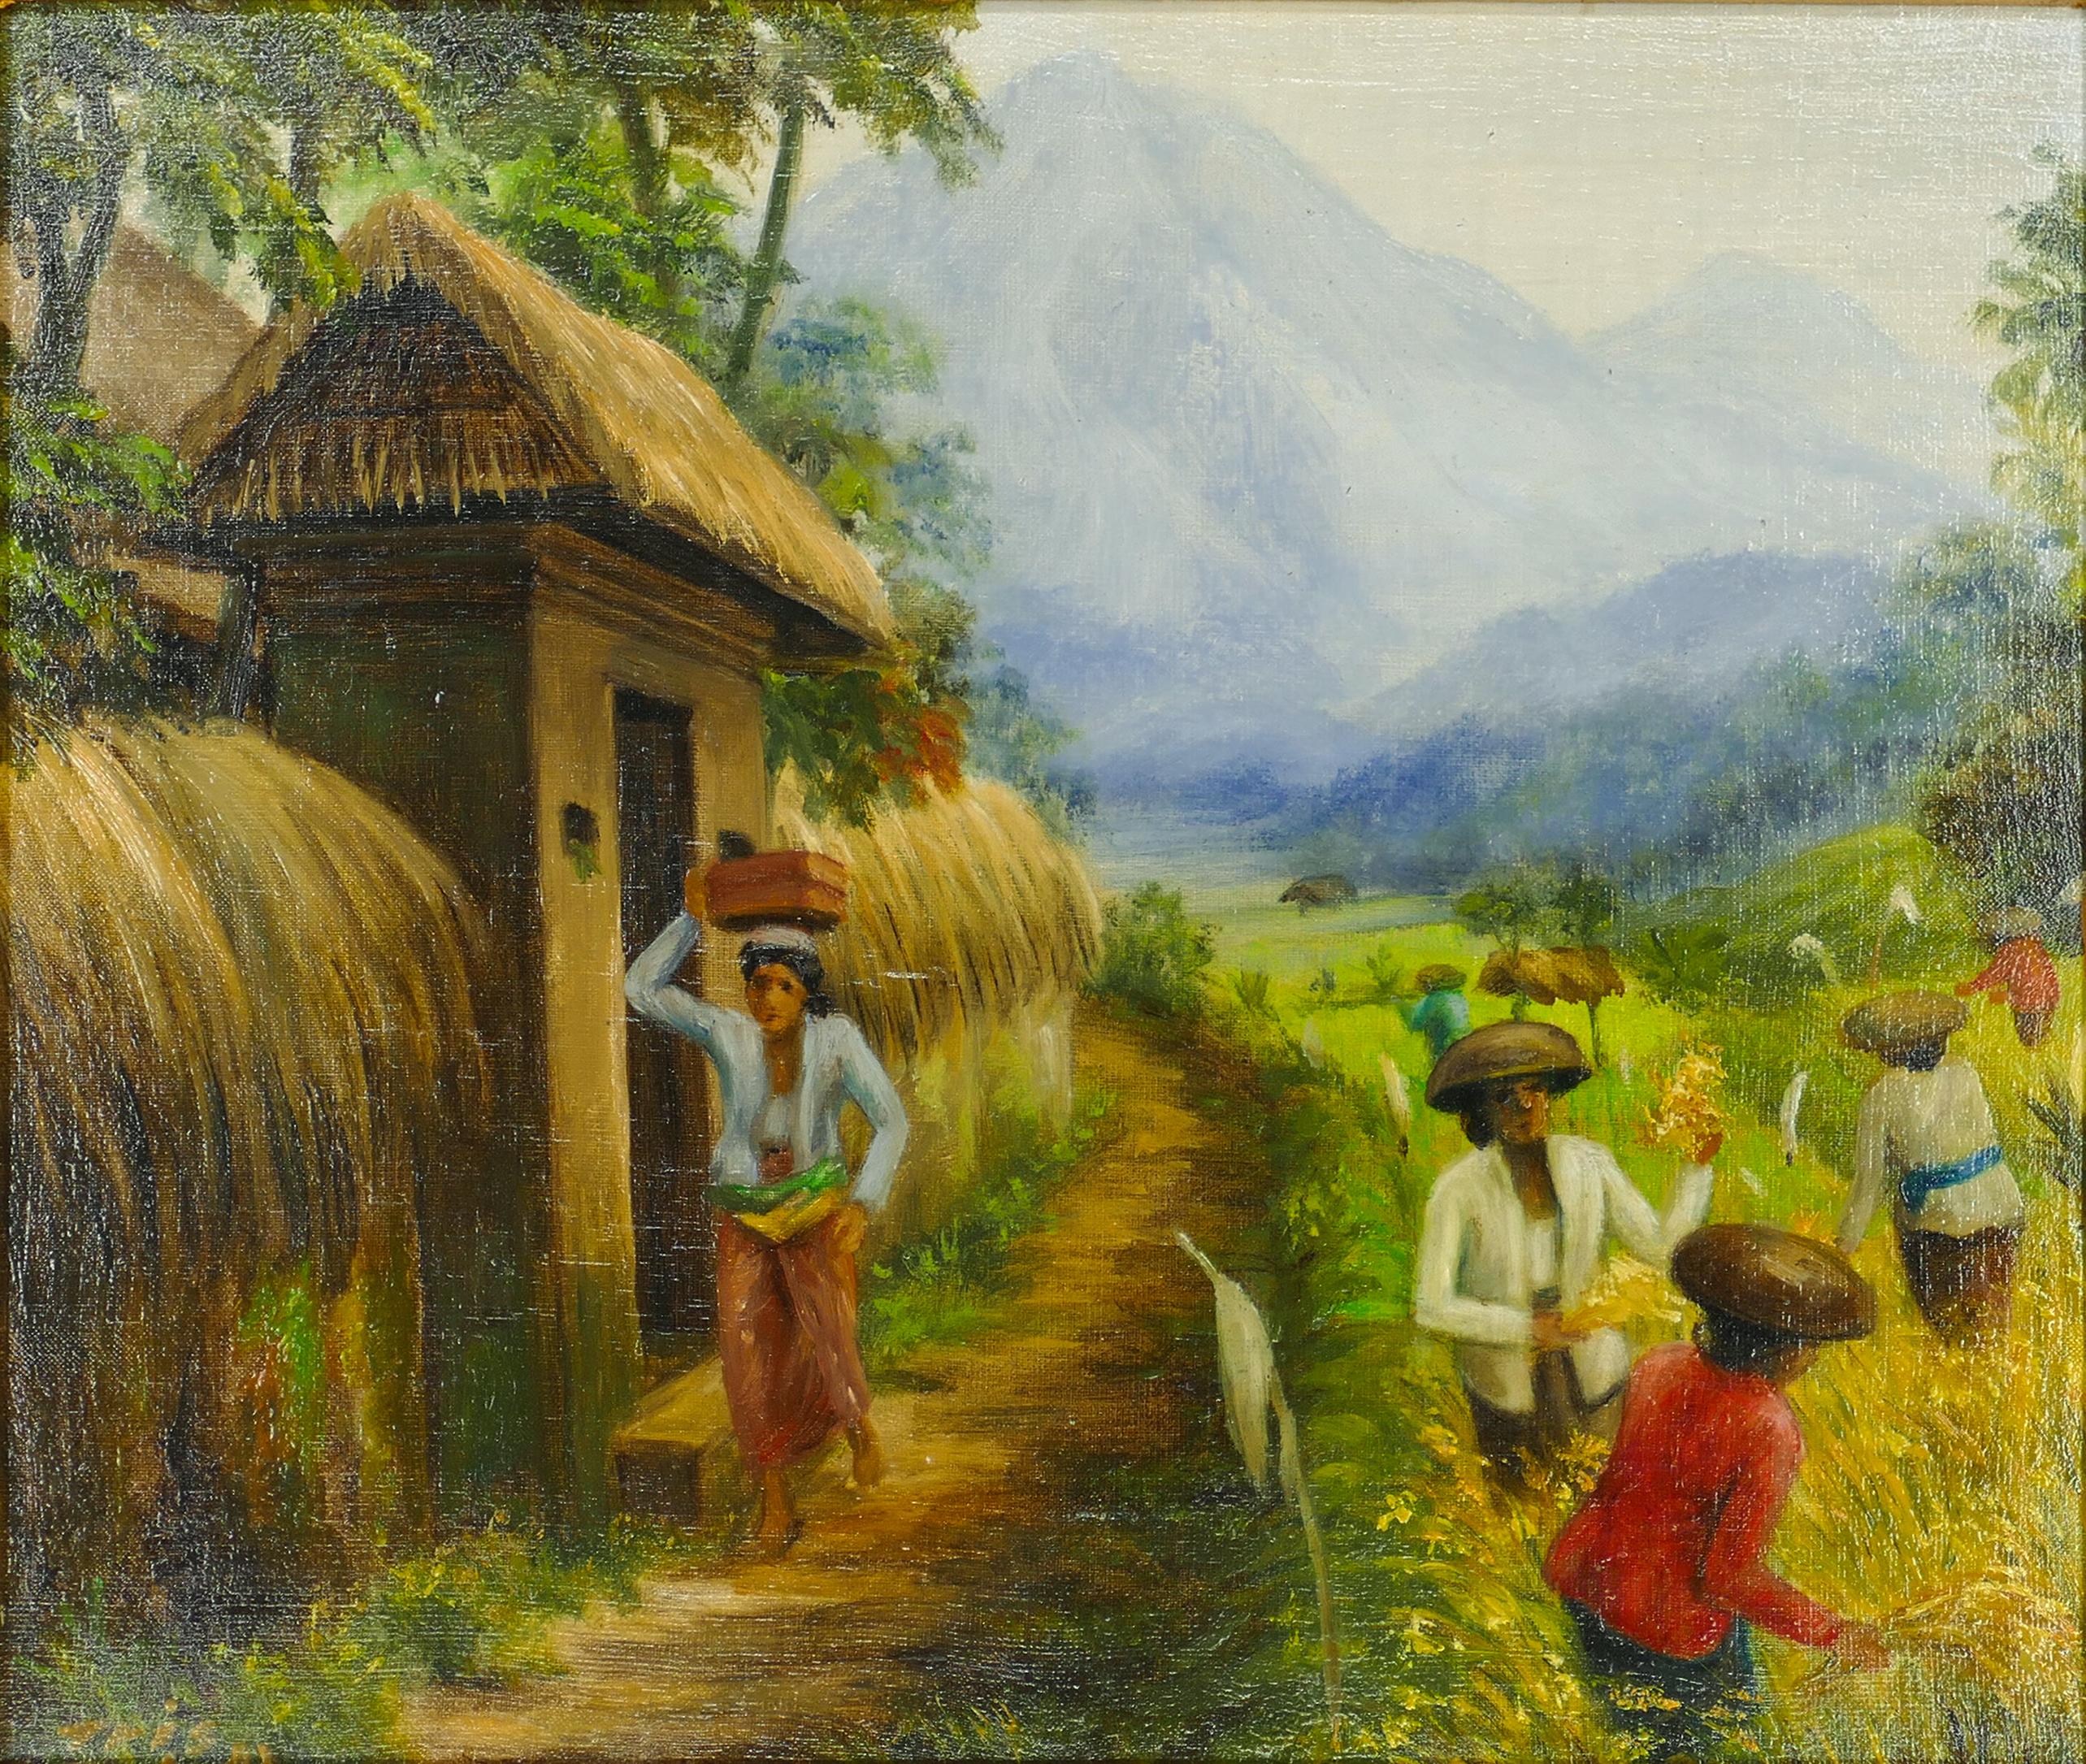 Unknown Figurative Painting - Rice Weeders at Work - Oil on Canvas Bali School - Mid 20th Century